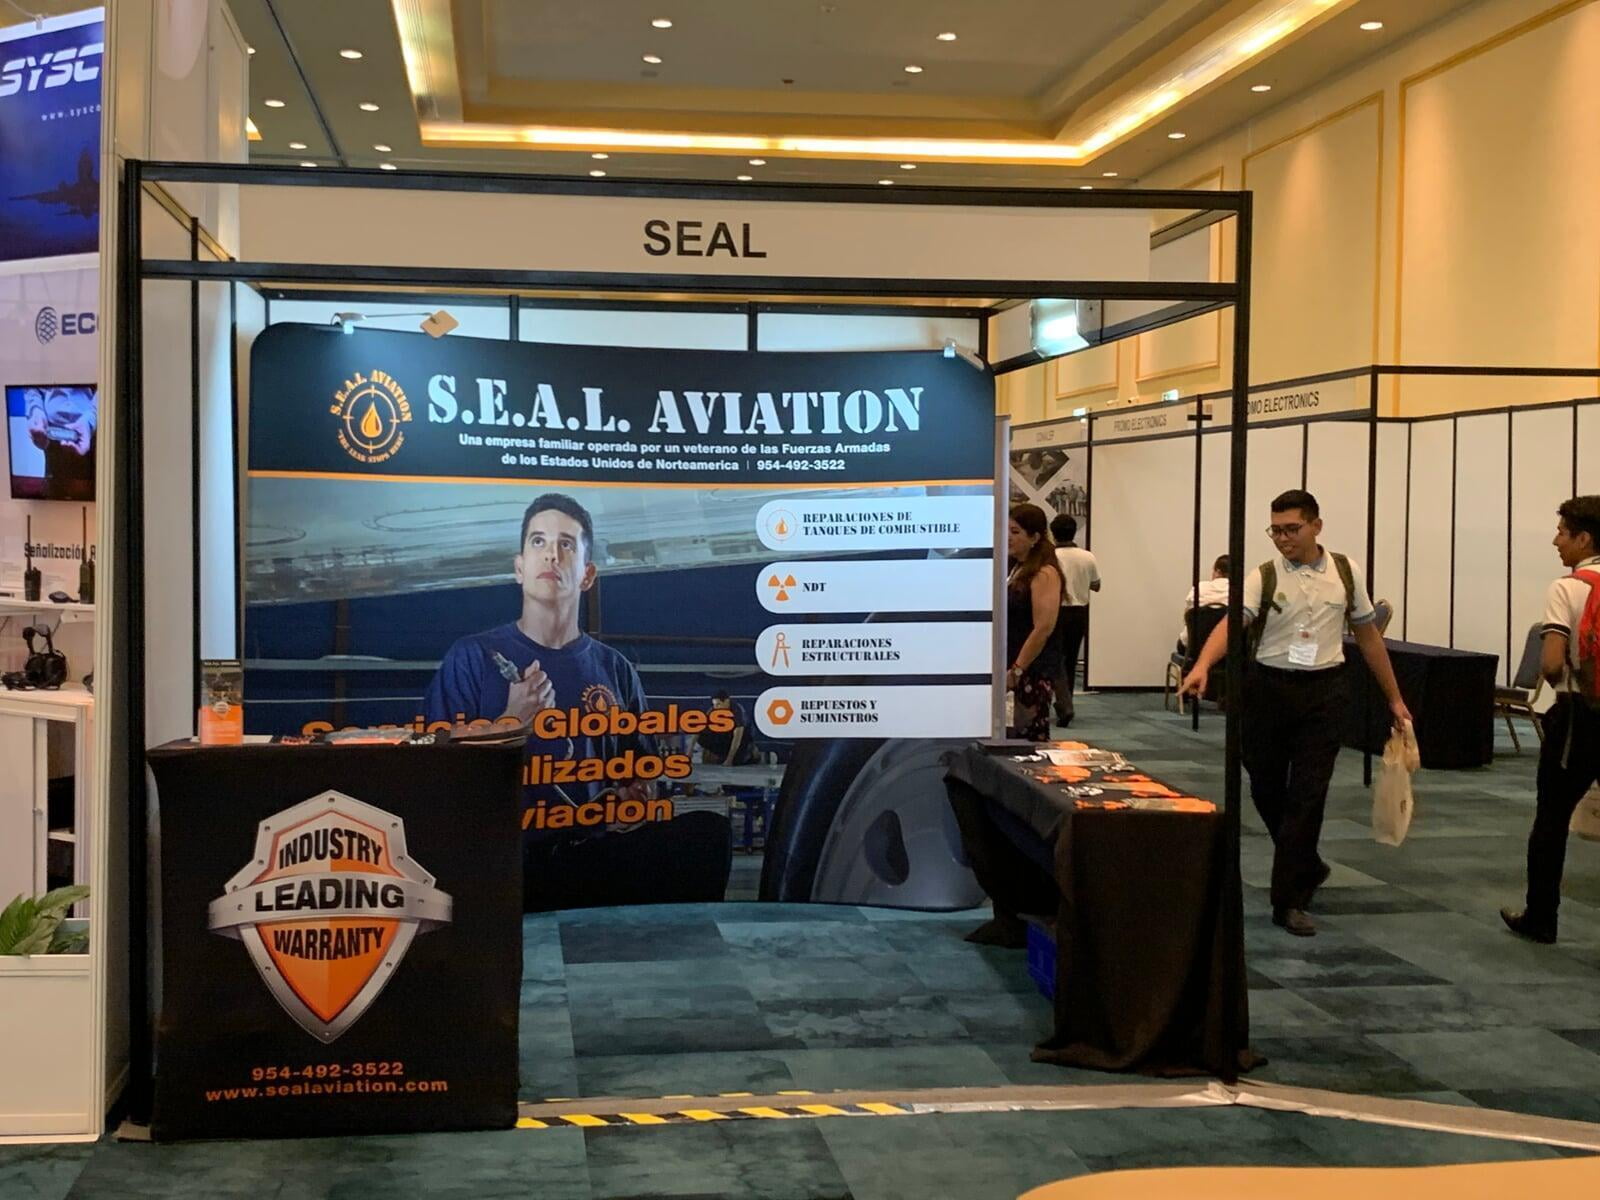 SEAL Aviation booth convention